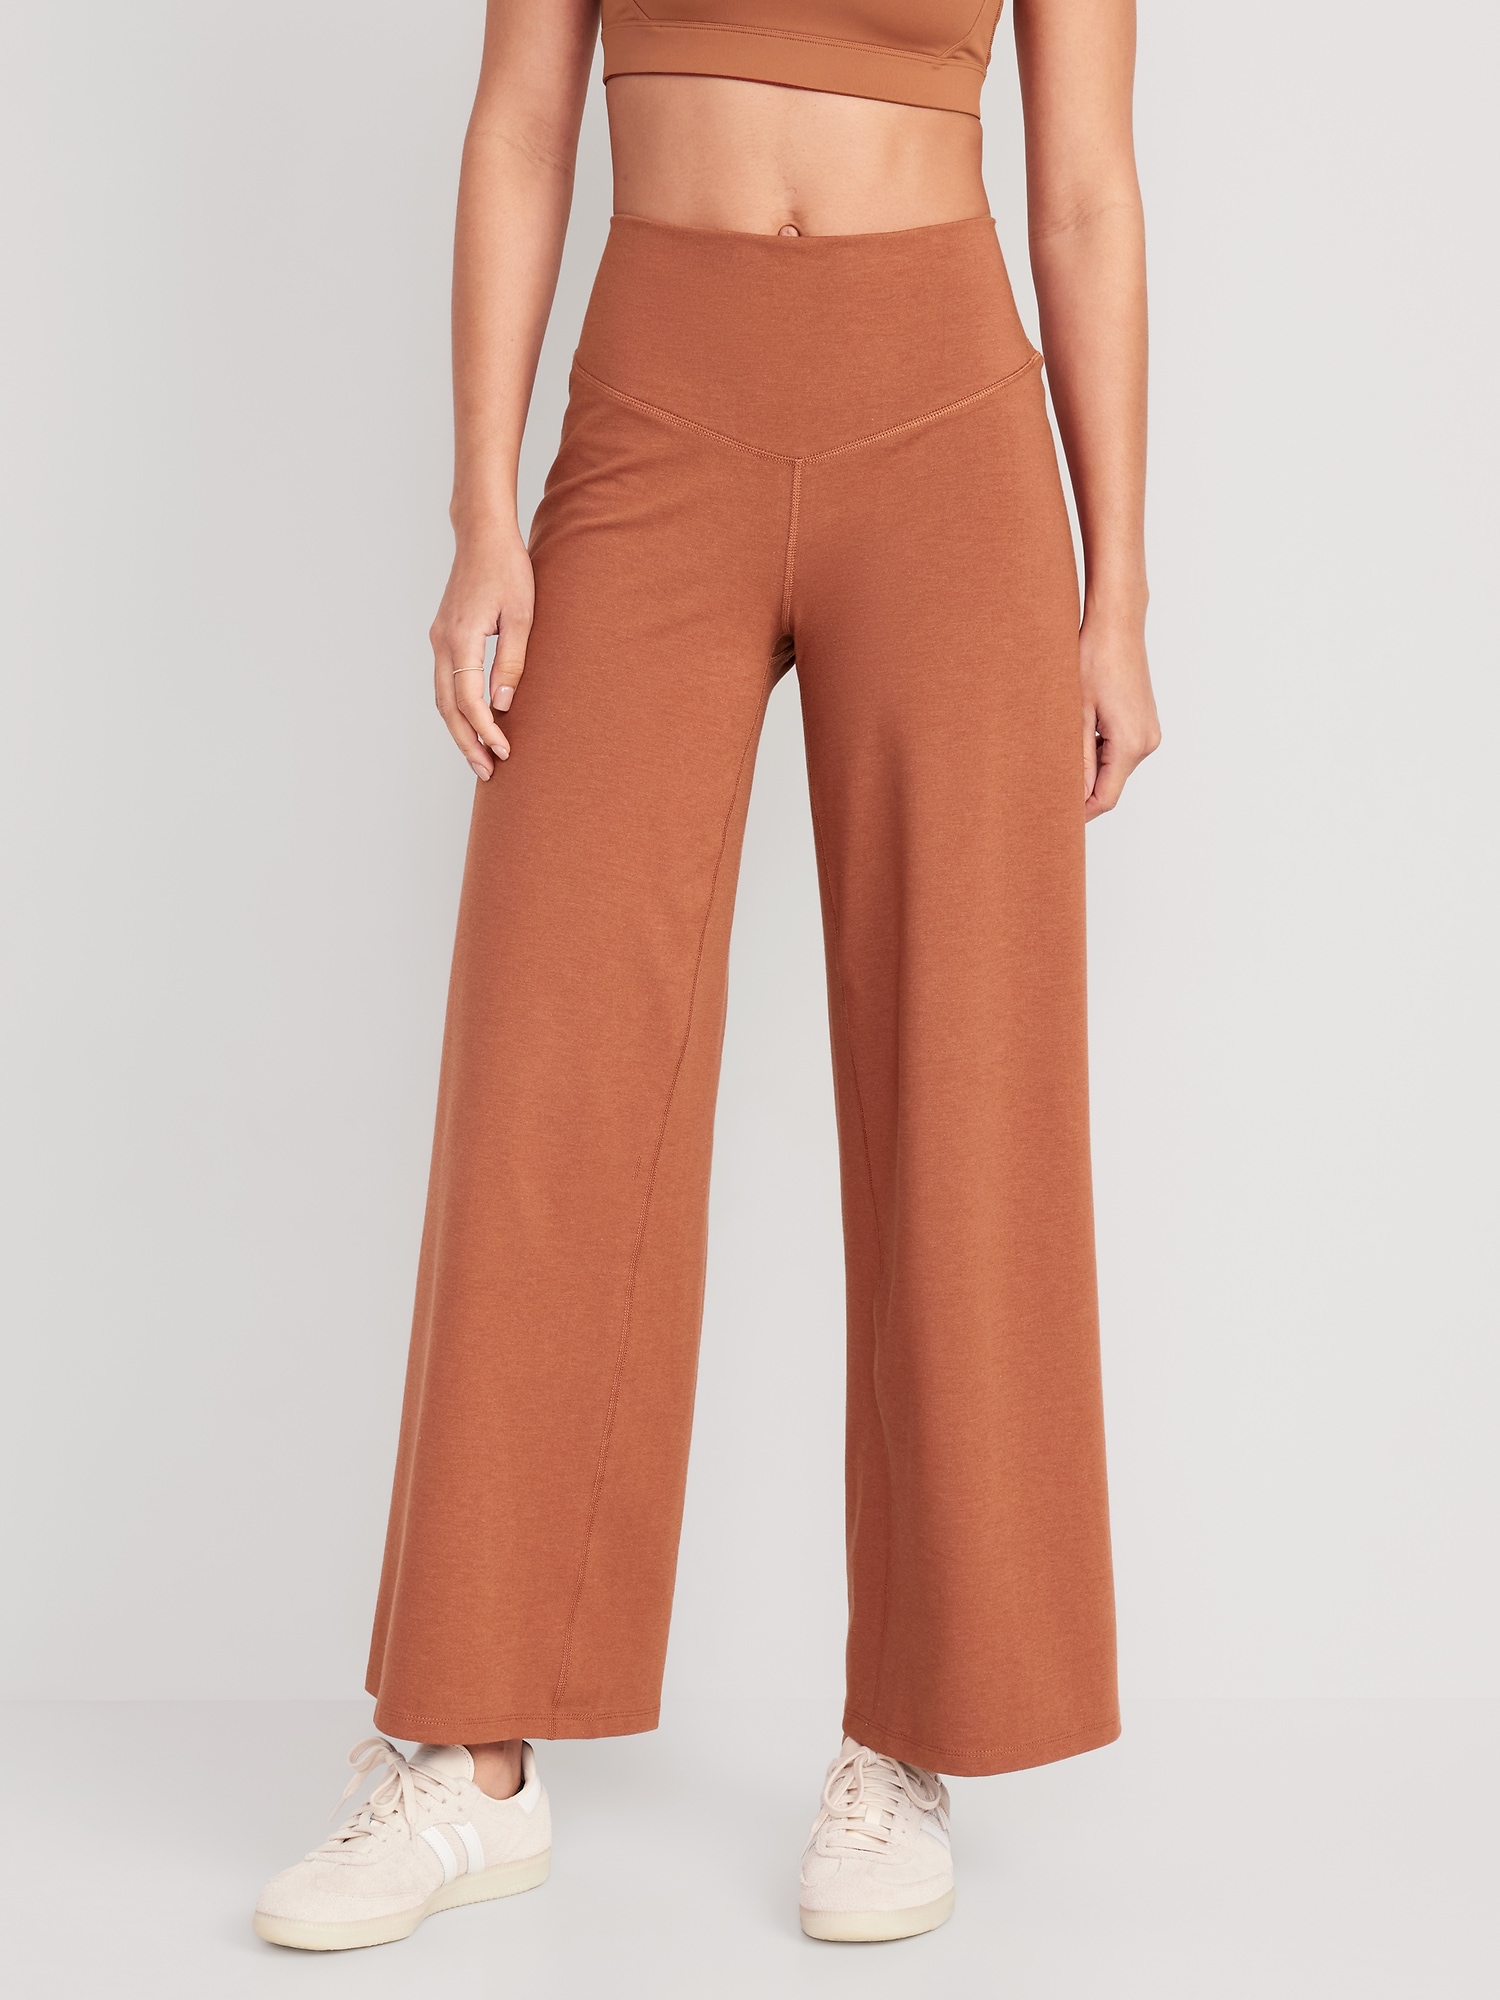 Old Navy - Extra High-Waisted PowerChill Slim Boot-Cut Pants for Women  orange